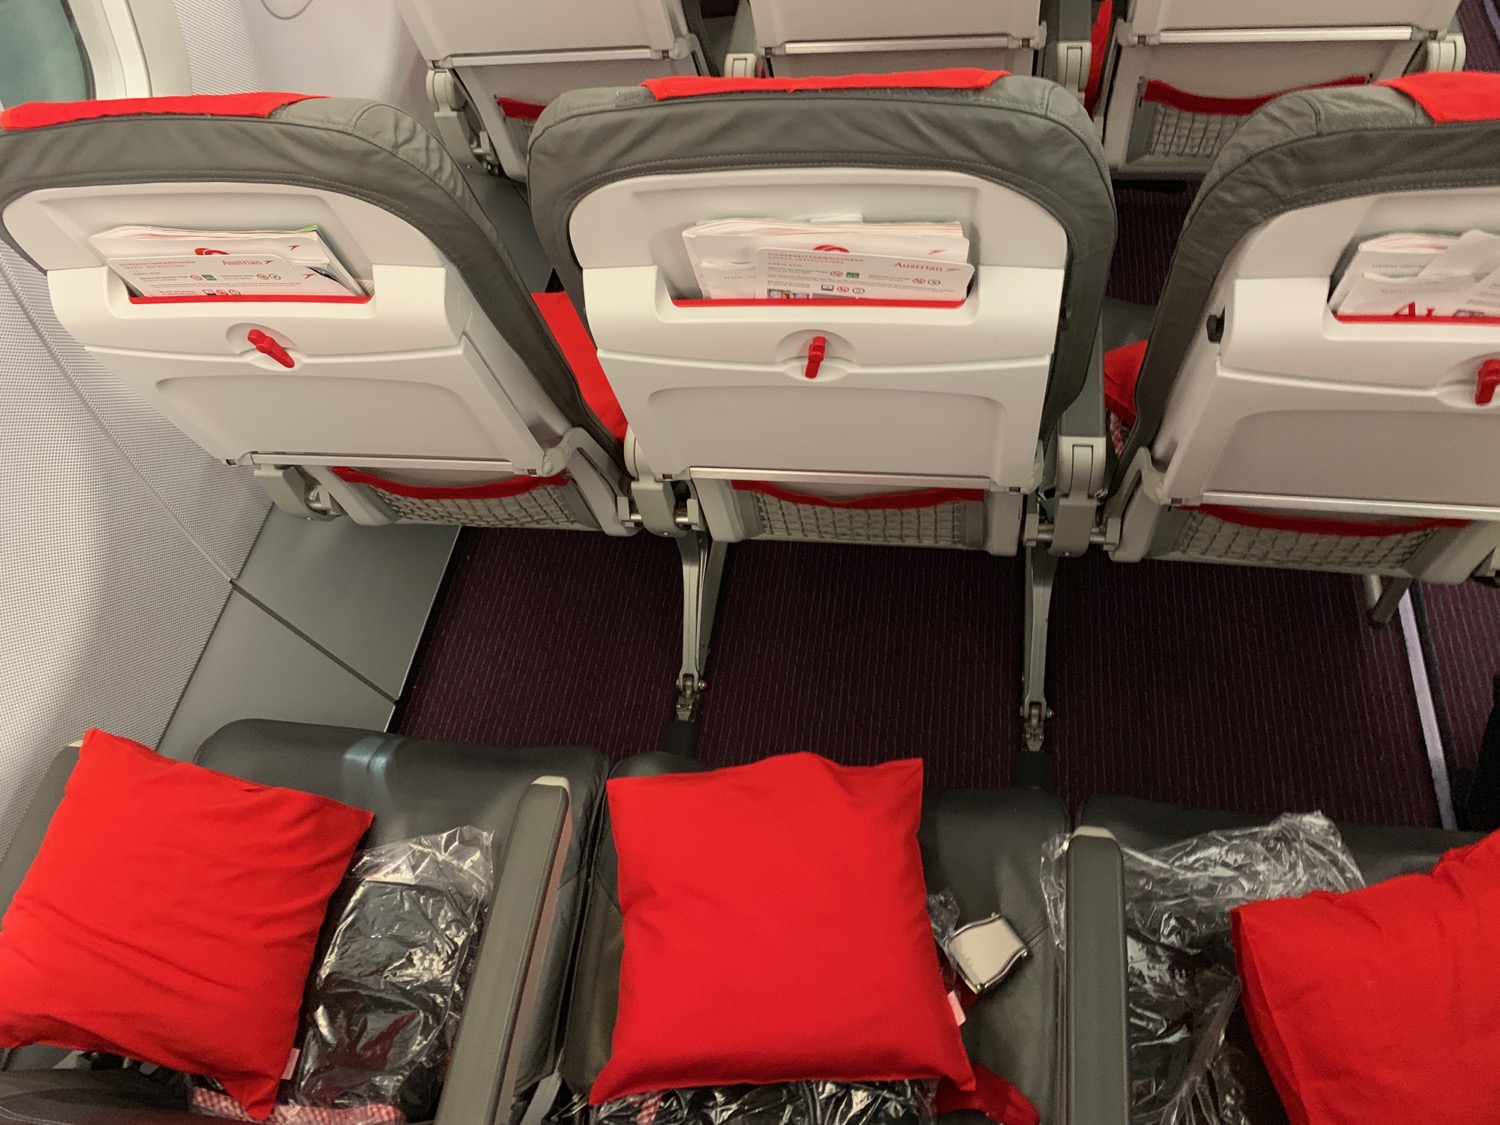 a row of seats with red pillows